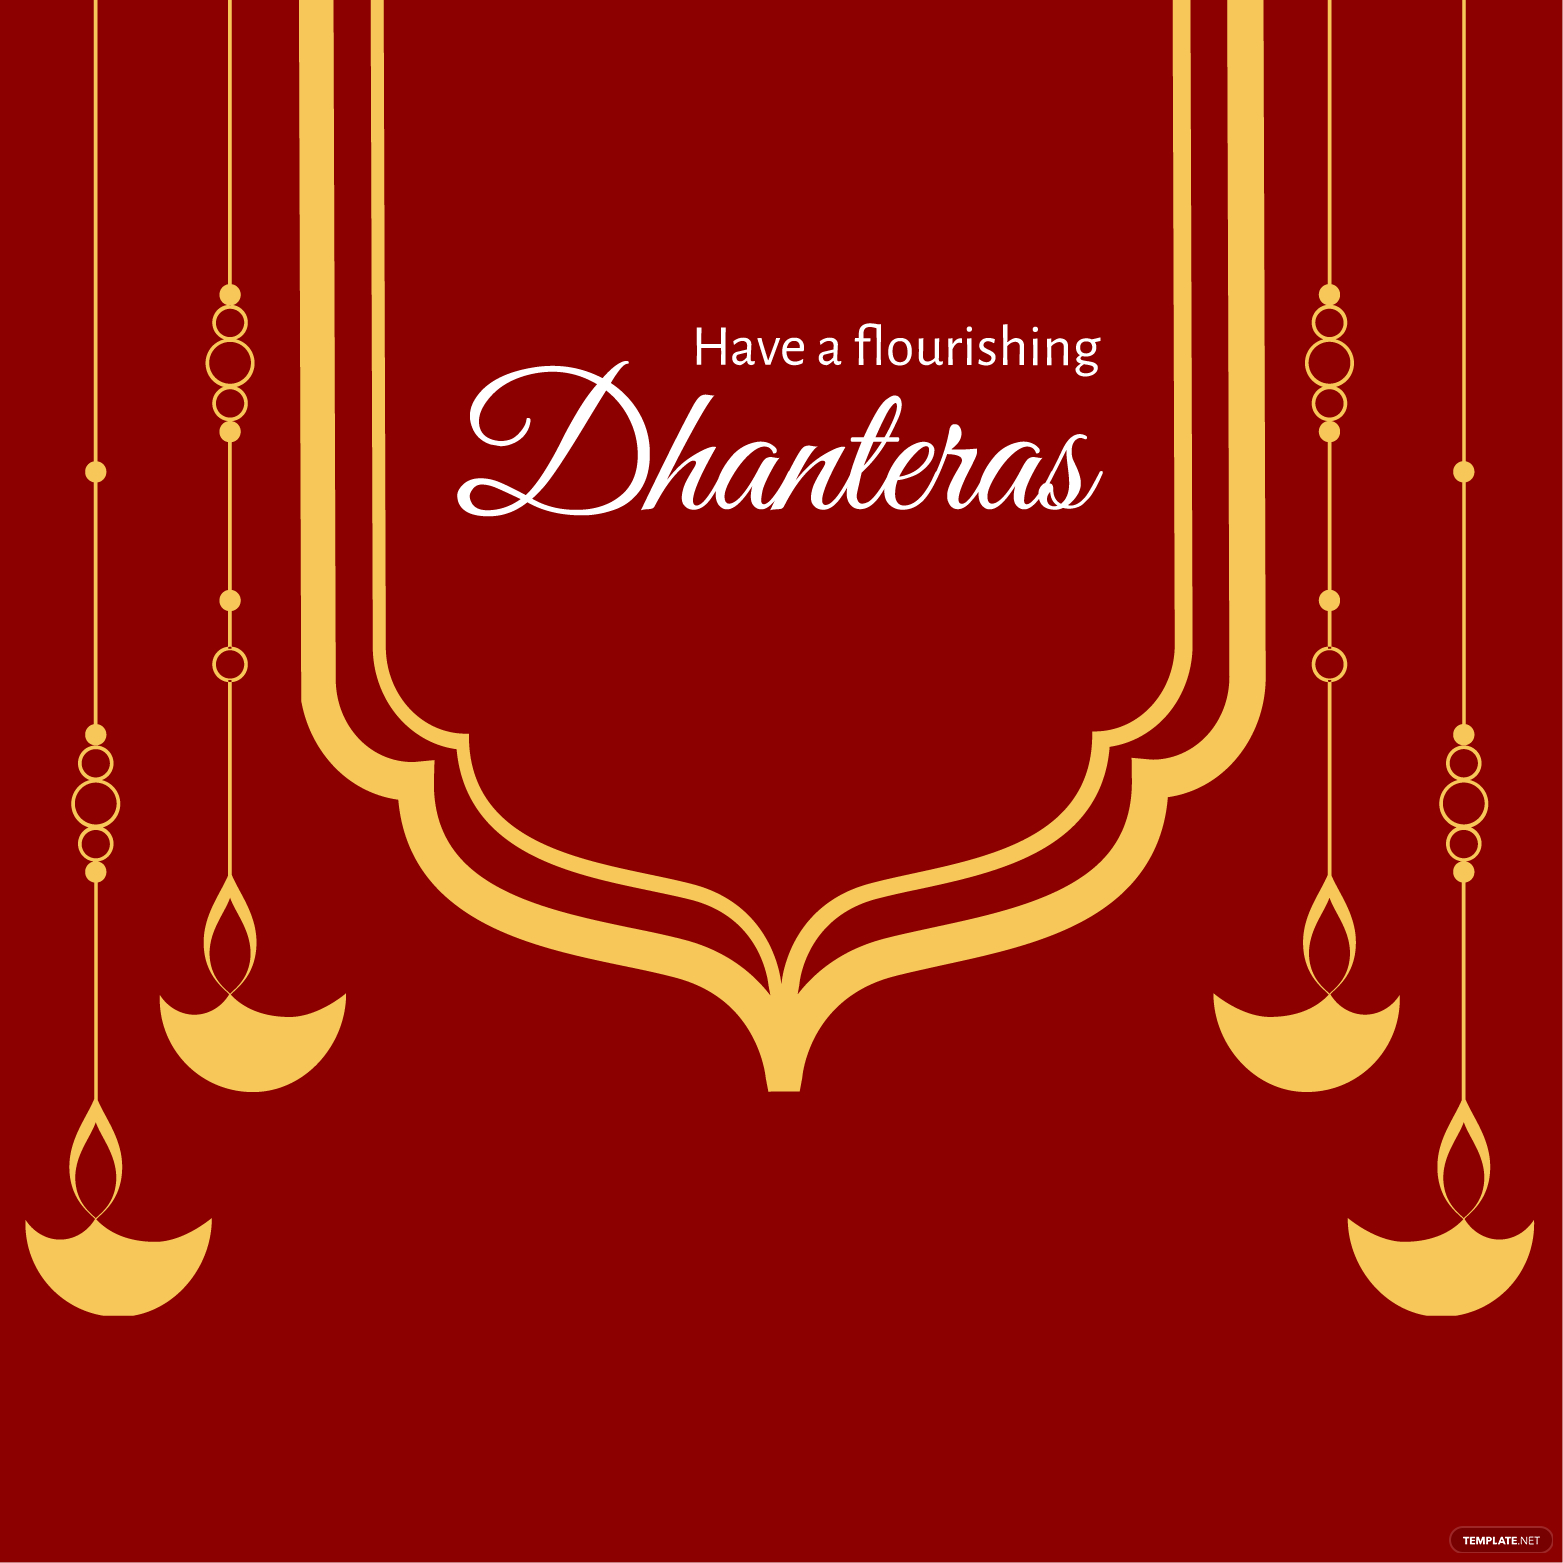 Dhanteras When Is Dhanteras Meaning Dates Purpose 6156